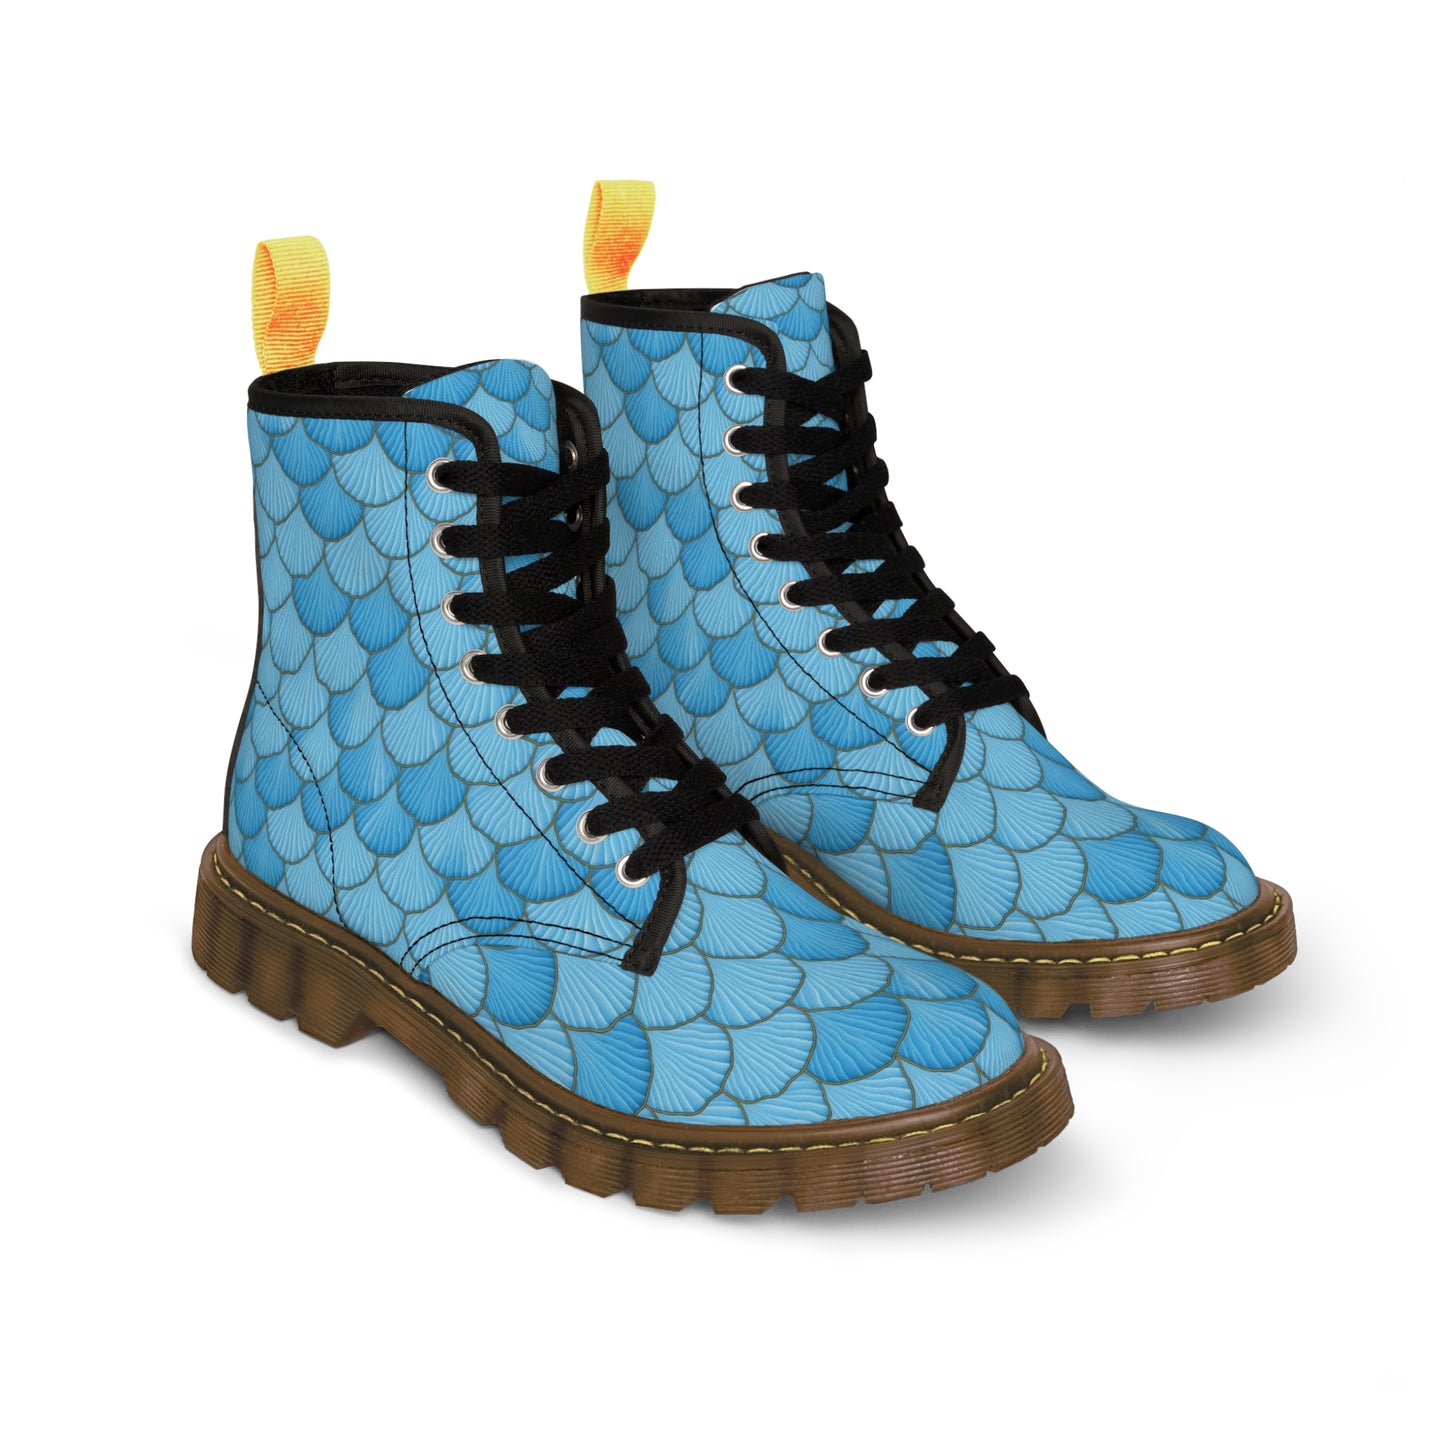 Make Waves with These Enchanting Seashell Mermaid-Print Canvas Boots for Women! Seashell Ocean Shoes/Boots